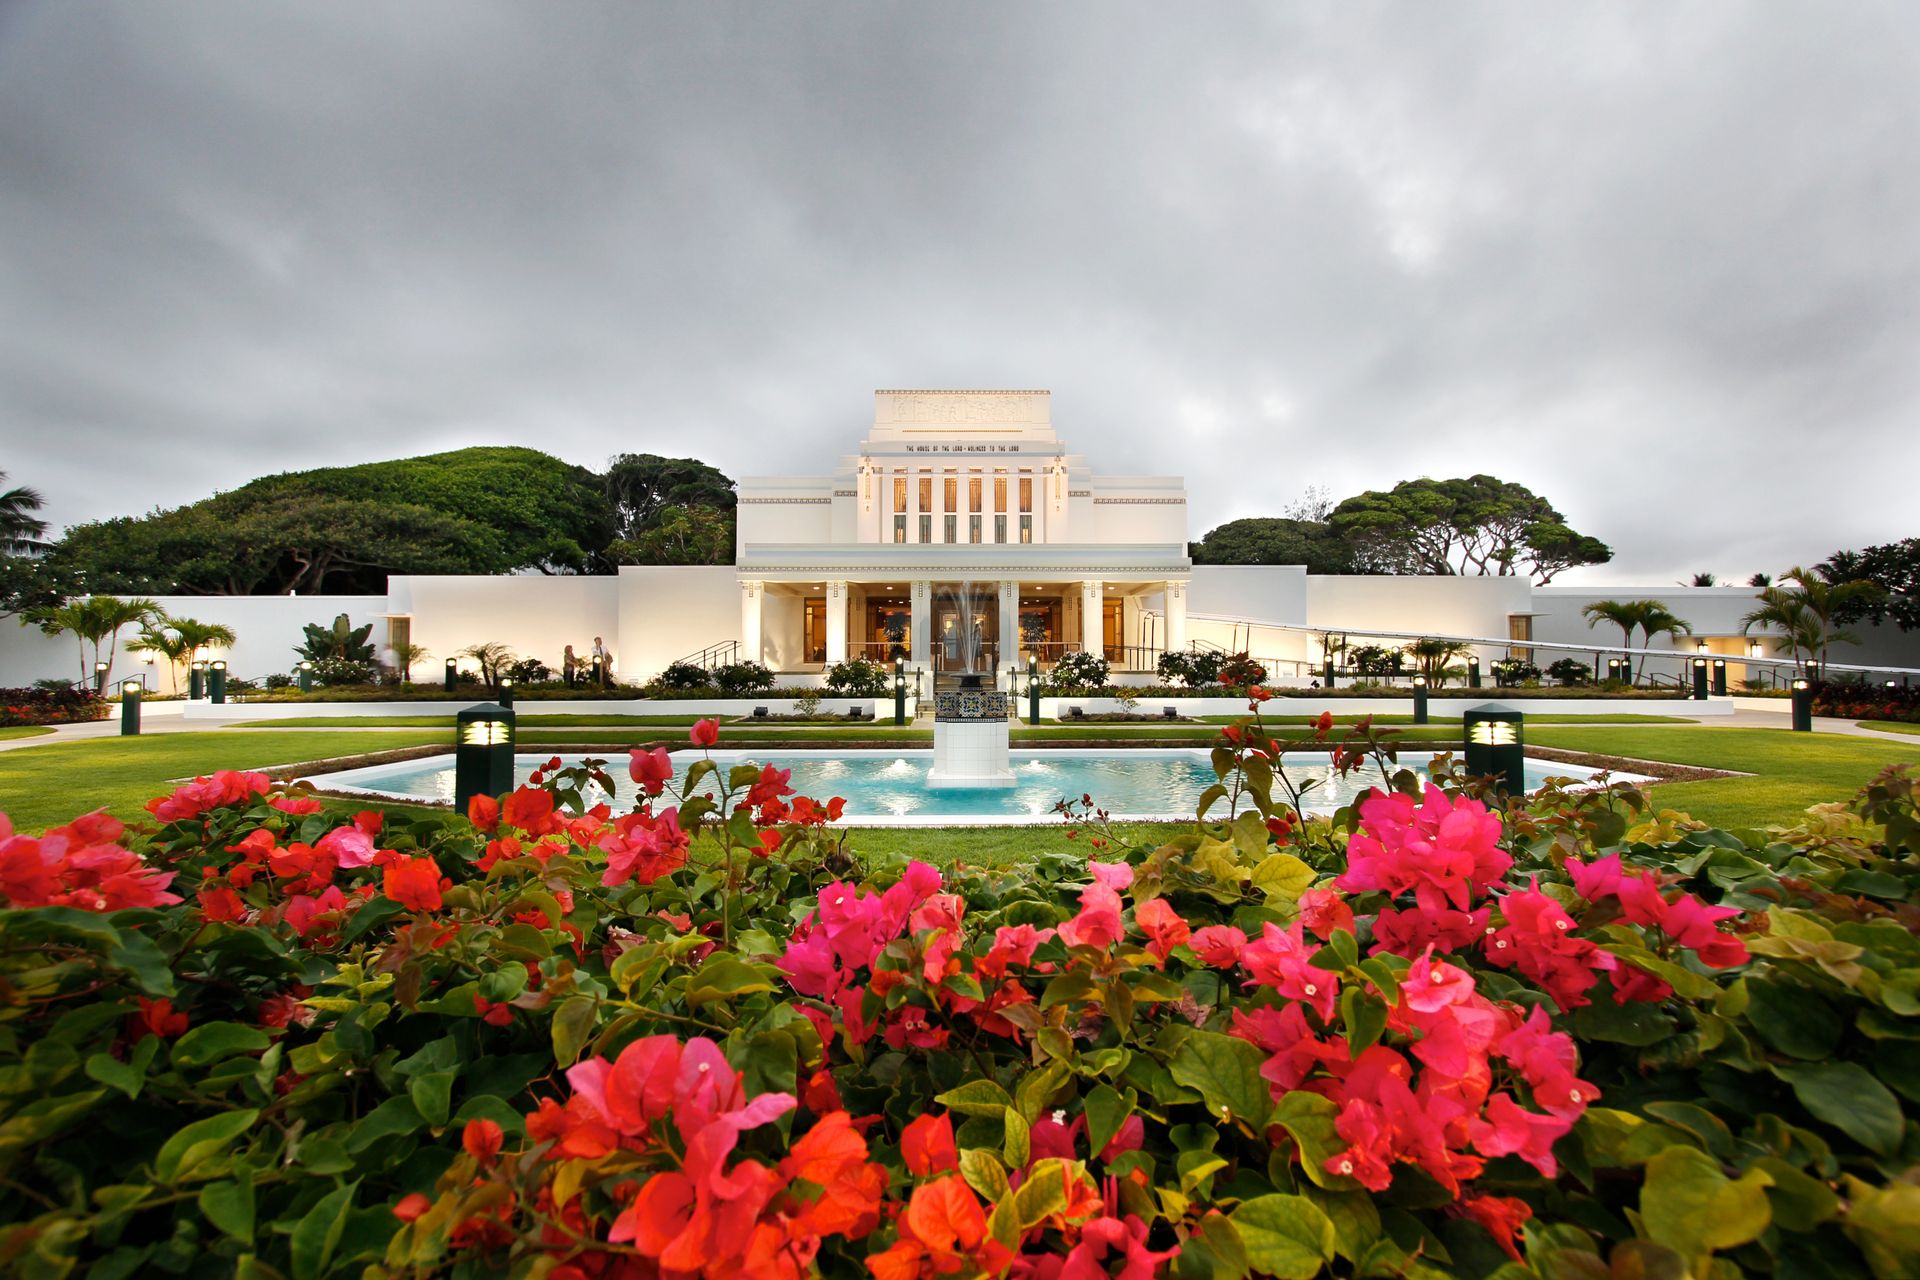 The Laie Hawaii Temple entrance, including a pond and scenery.